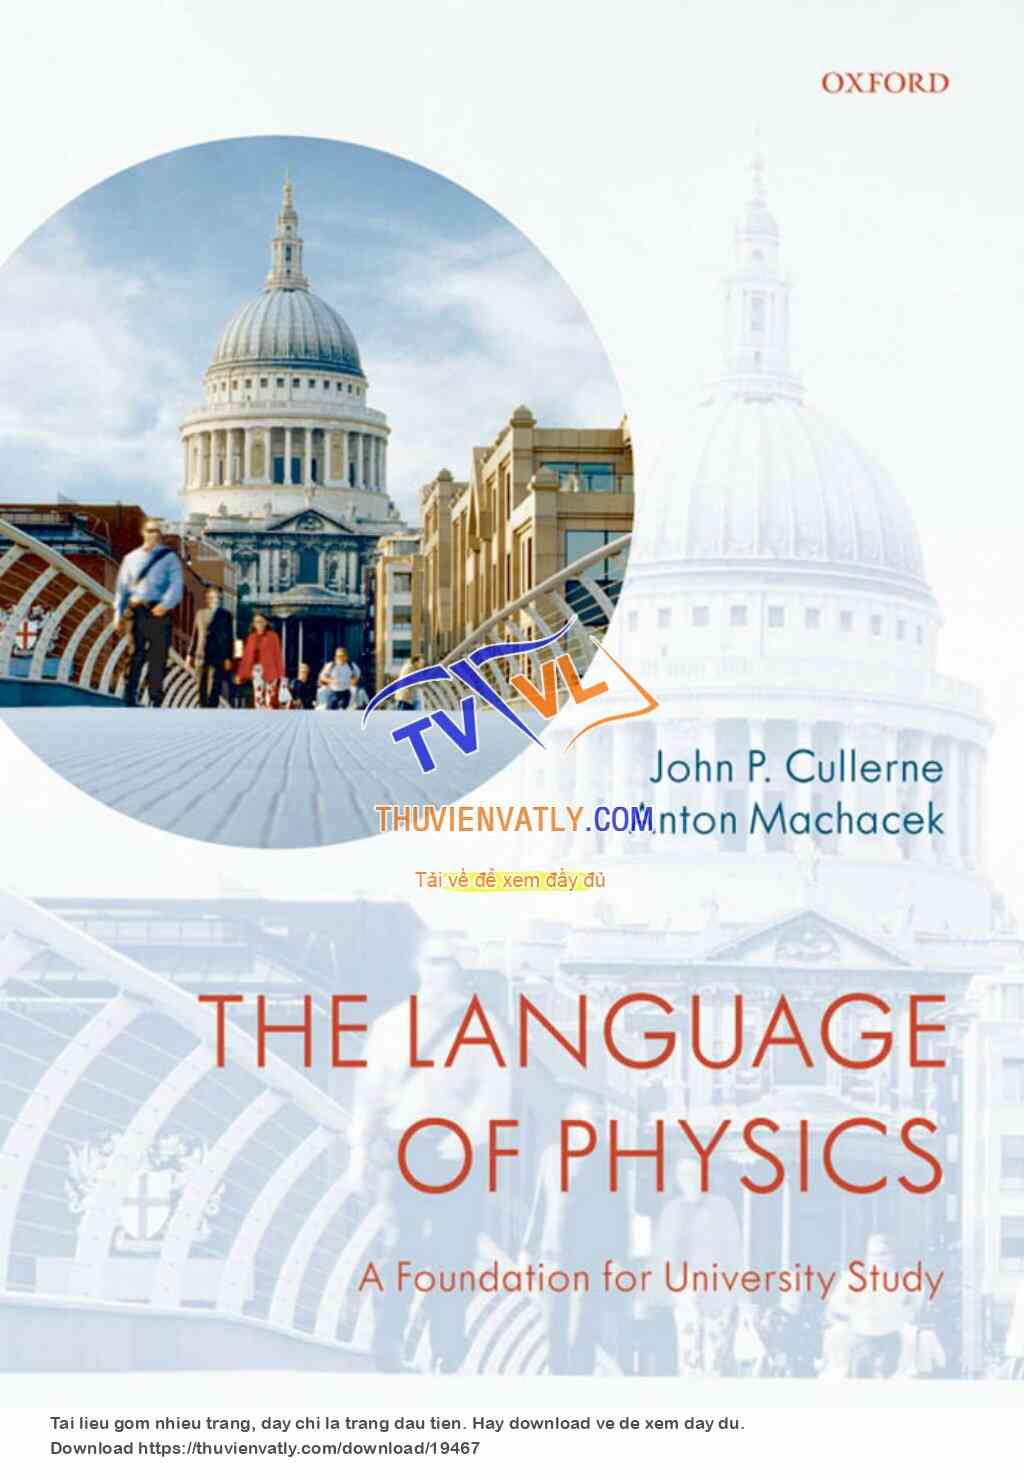 The Language of Physics - A Foundation for University Study - J. Cullerne, A. Machacek (Oxford, 2008)